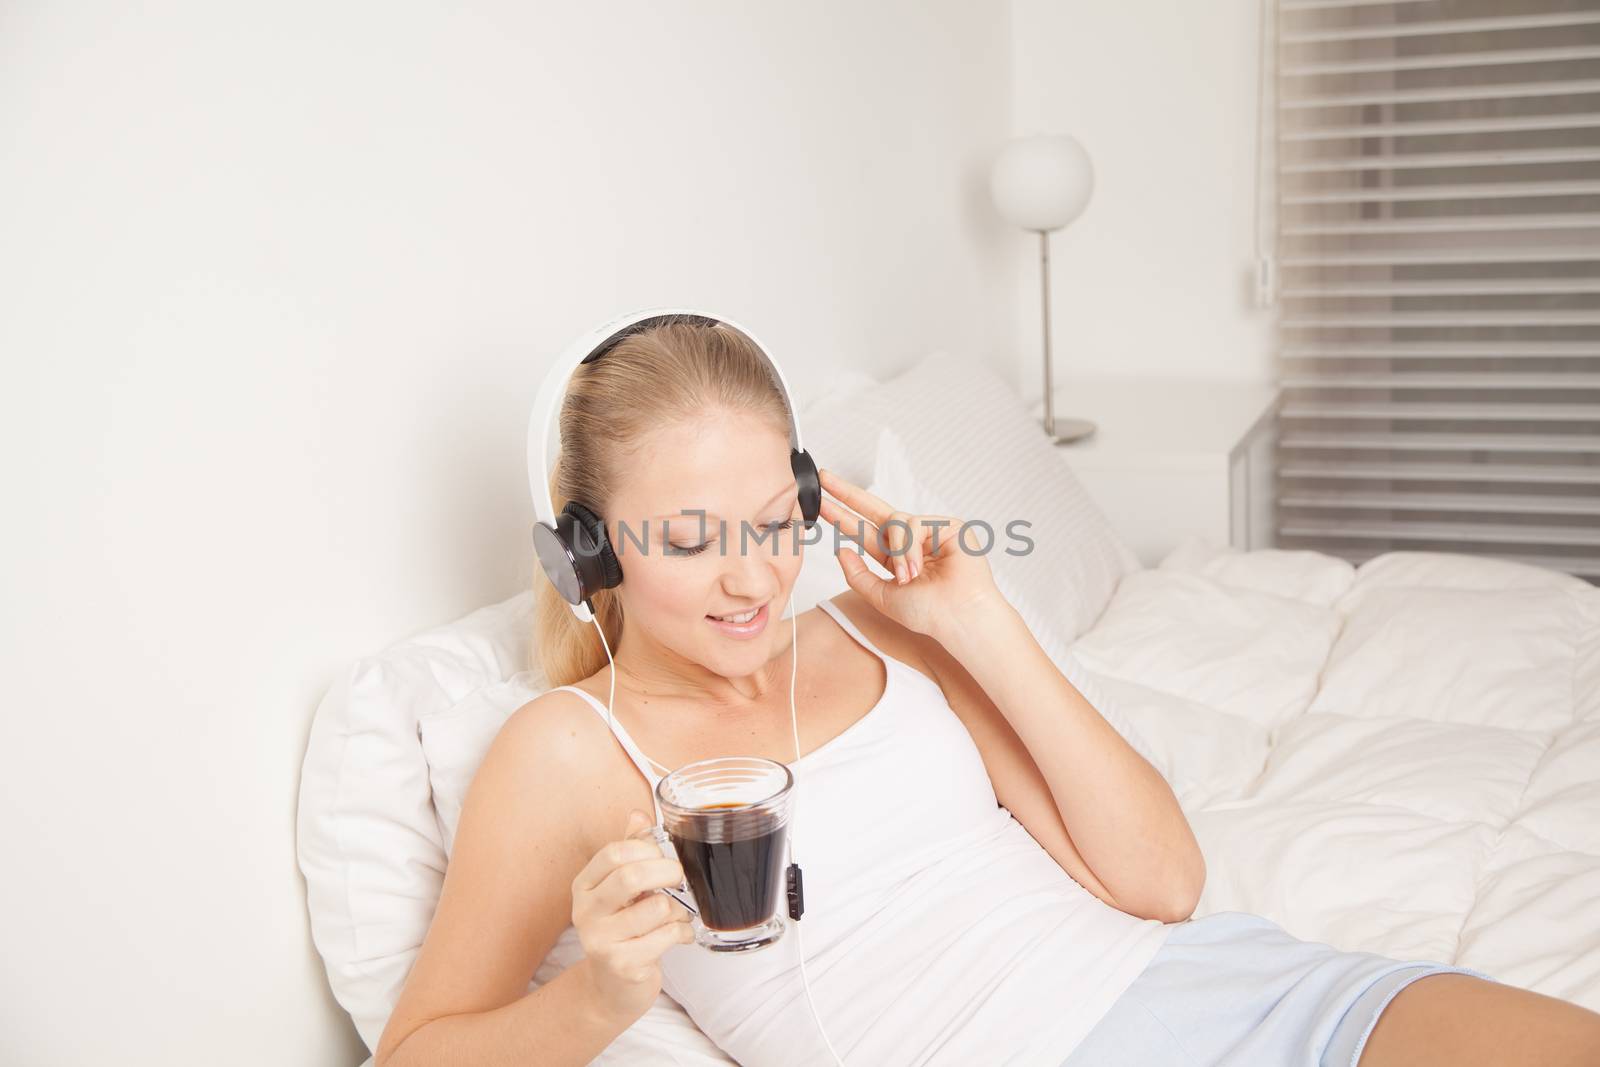 Pretty woman listening to music and drinking coffe